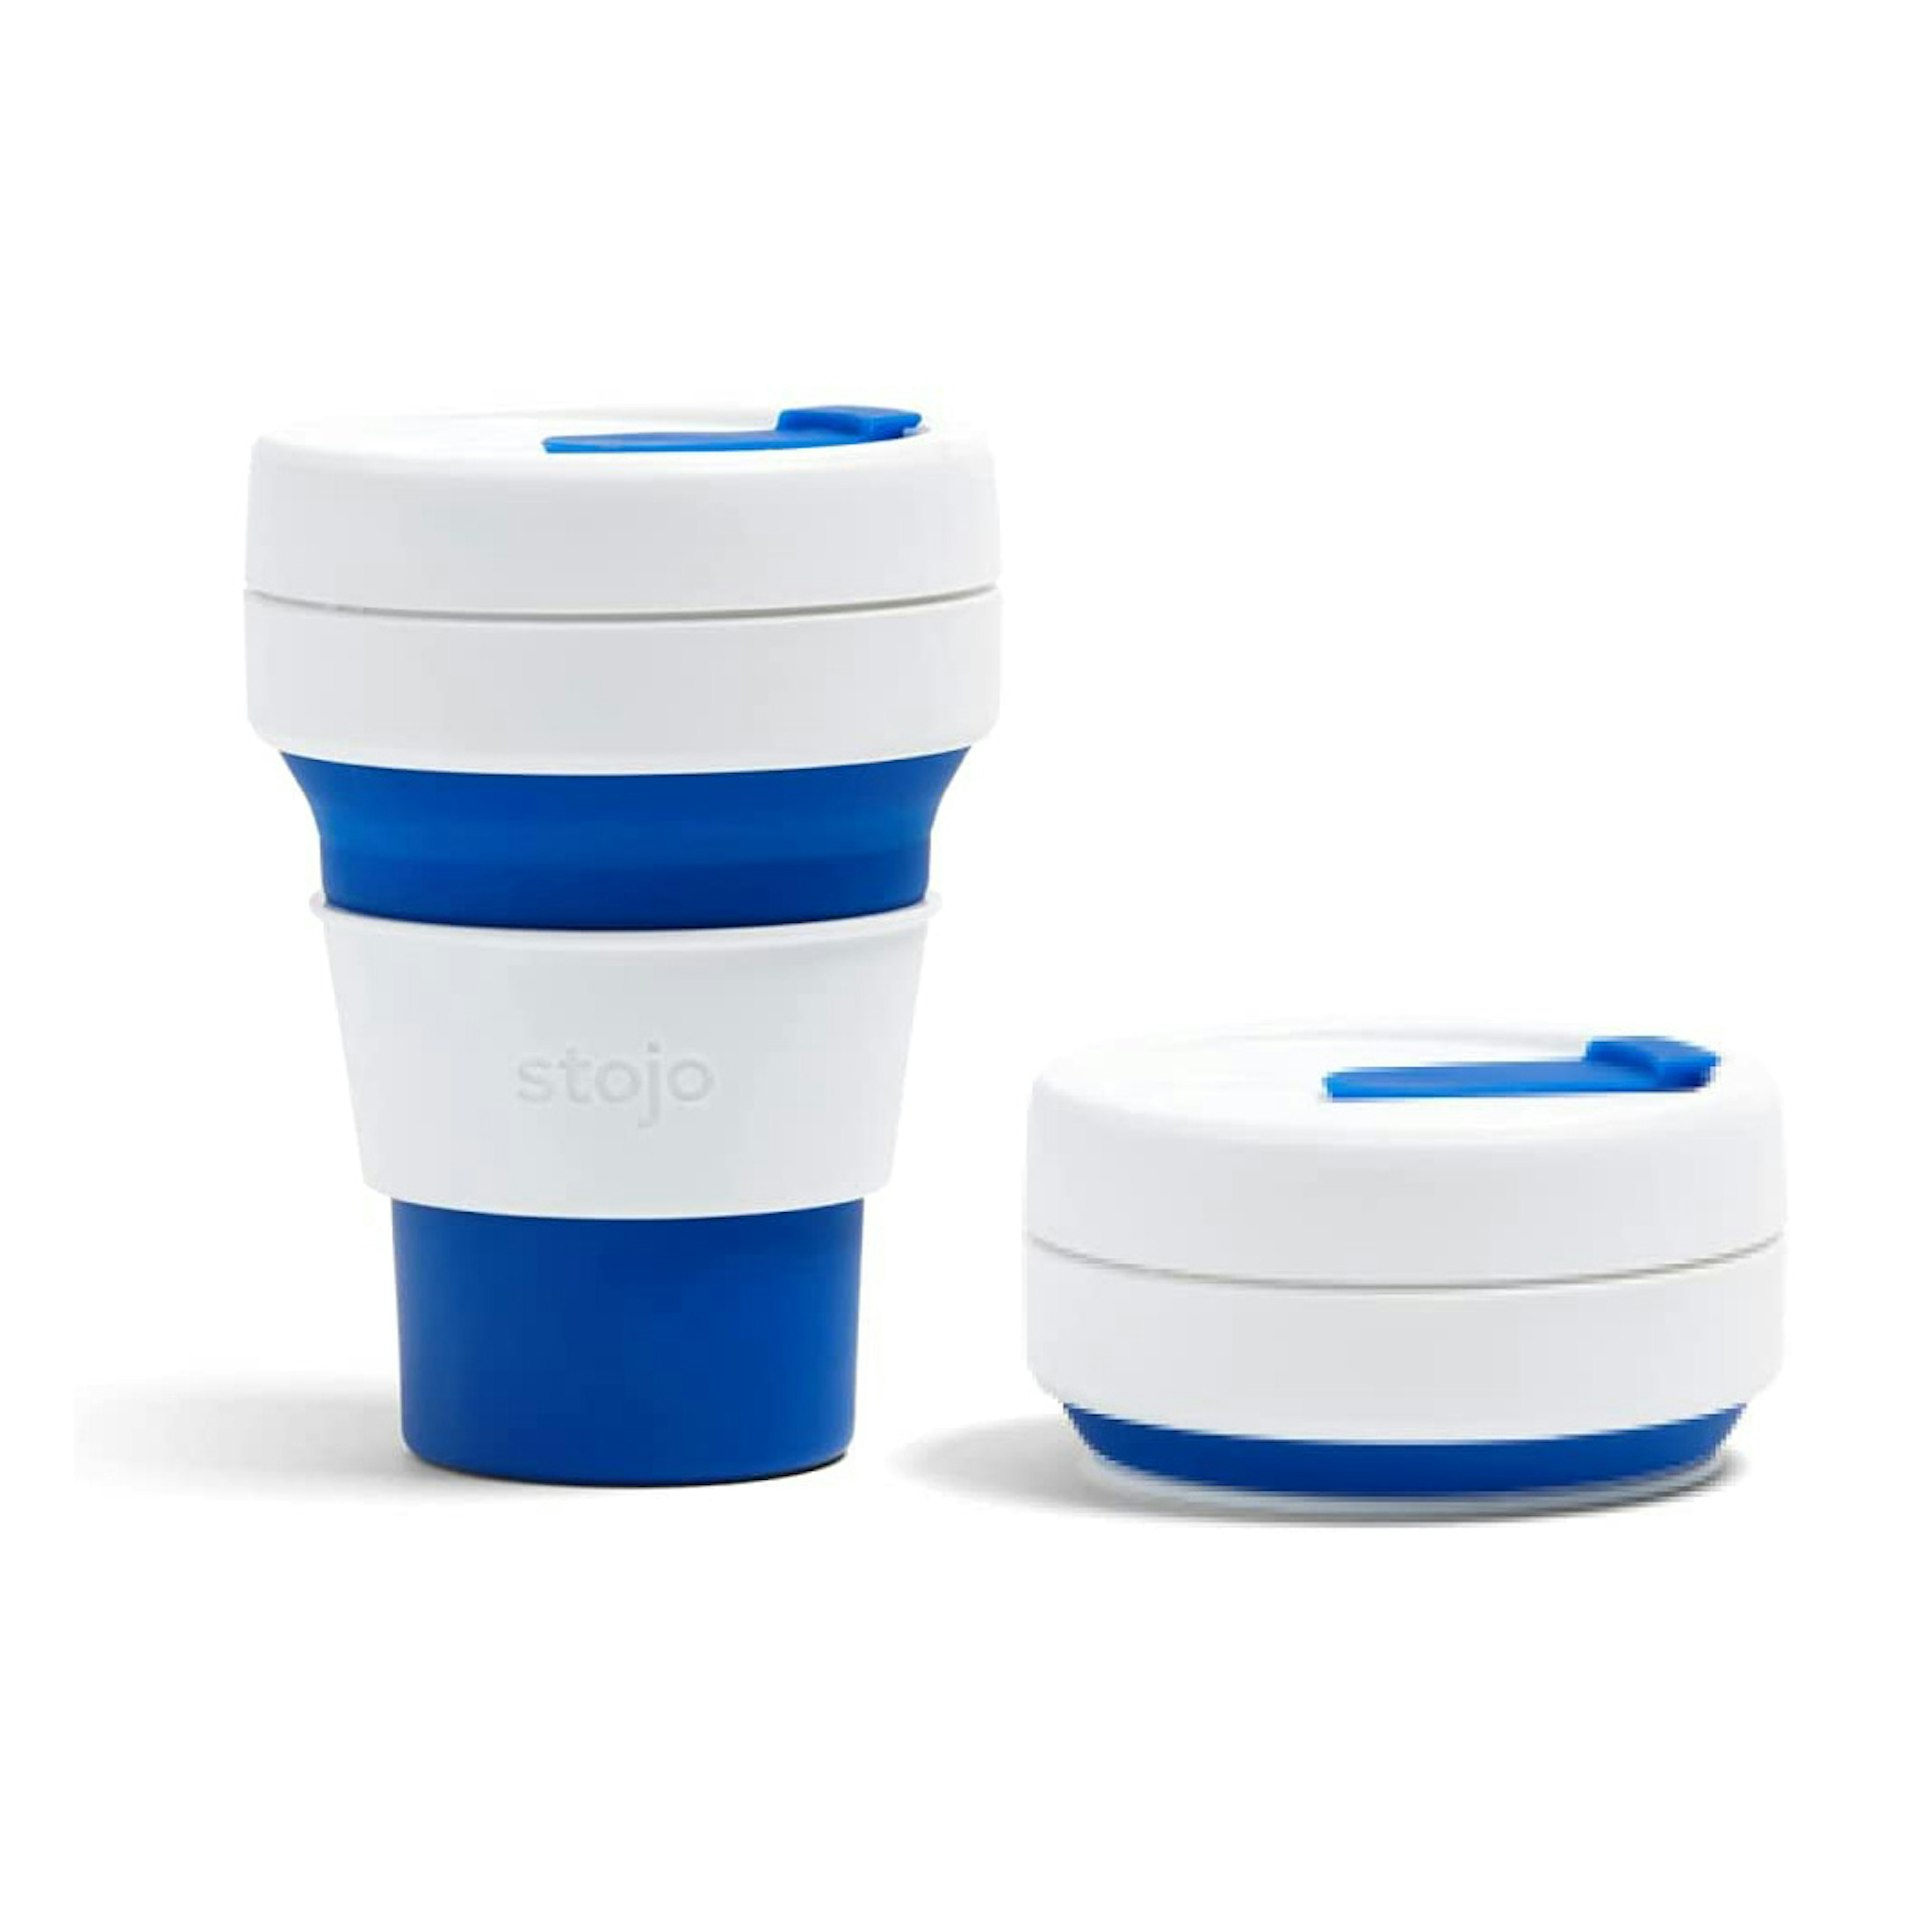 Stojo's collapsible On the Go coffee cup